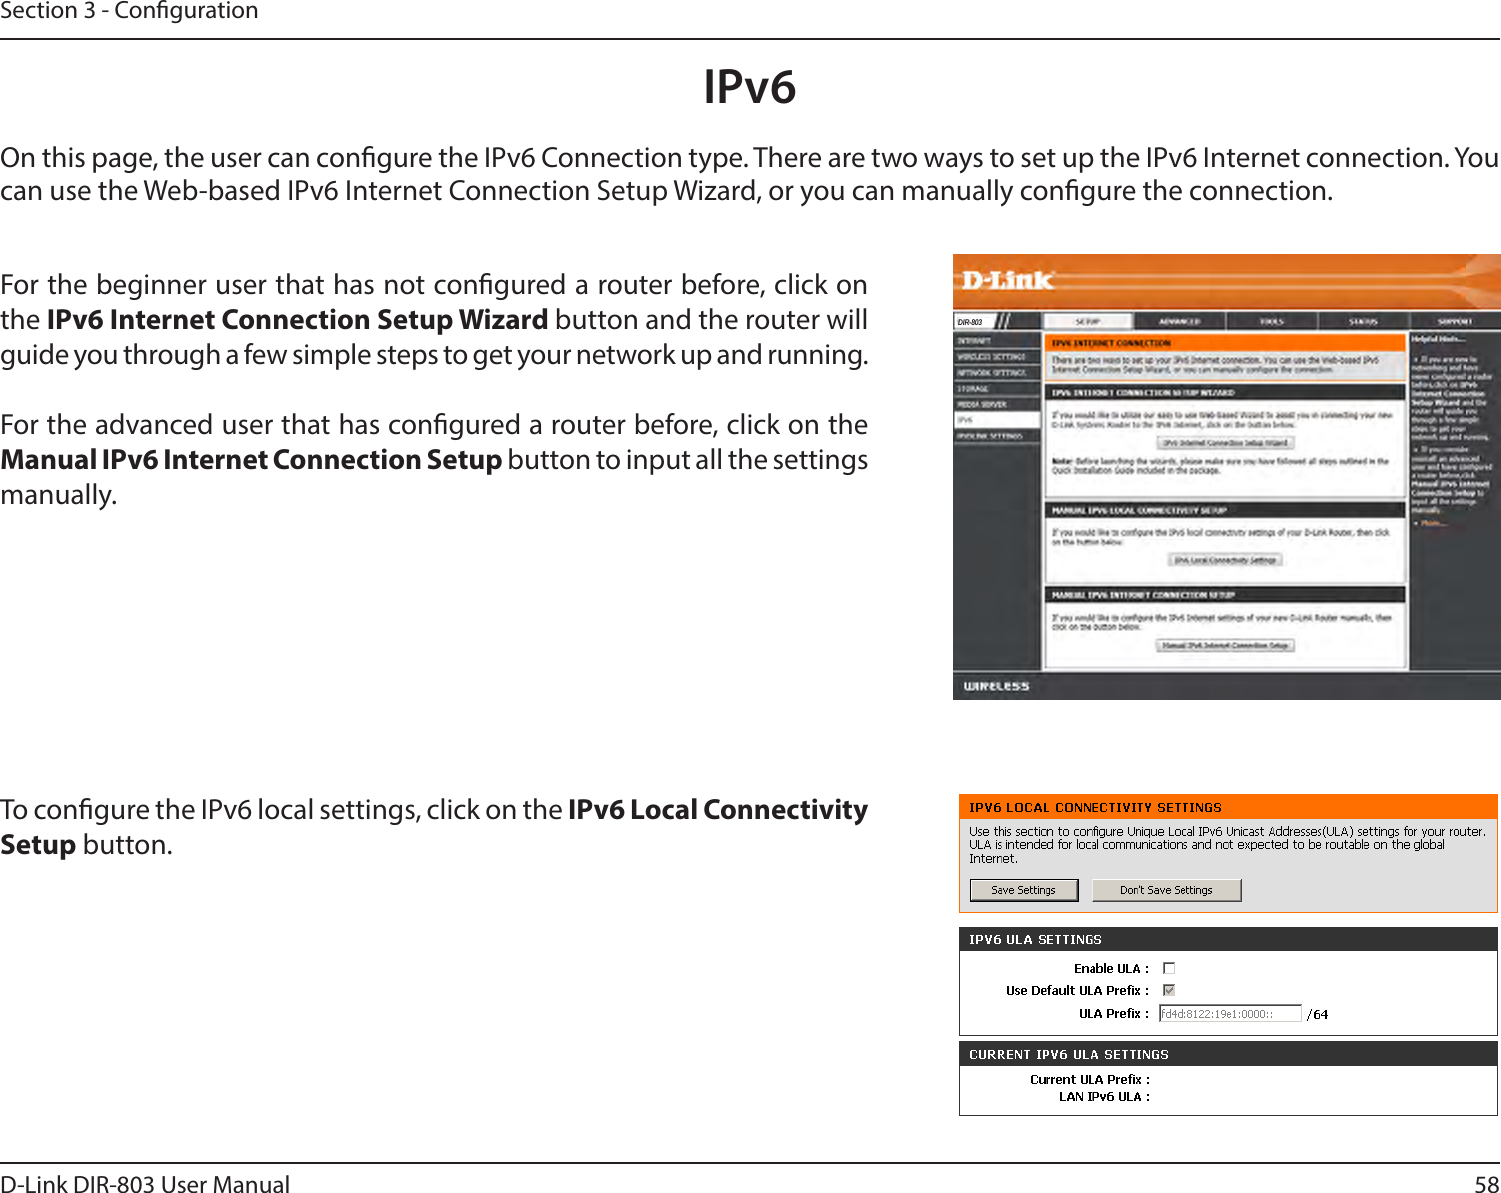 58D-Link DIR-803 User ManualSection 3 - CongurationIPv6On this page, the user can congure the IPv6 Connection type. There are two ways to set up the IPv6 Internet connection. You can use the Web-based IPv6 Internet Connection Setup Wizard, or you can manually congure the connection.For the beginner user that has not congured a router before, click on the IPv6 Internet Connection Setup Wizard button and the router will guide you through a few simple steps to get your network up and running.For the advanced user that has congured a router before, click on the Manual IPv6 Internet Connection Setup button to input all the settings manually.To congure the IPv6 local settings, click on the IPv6 Local Connectivity Setup button.DIR-803